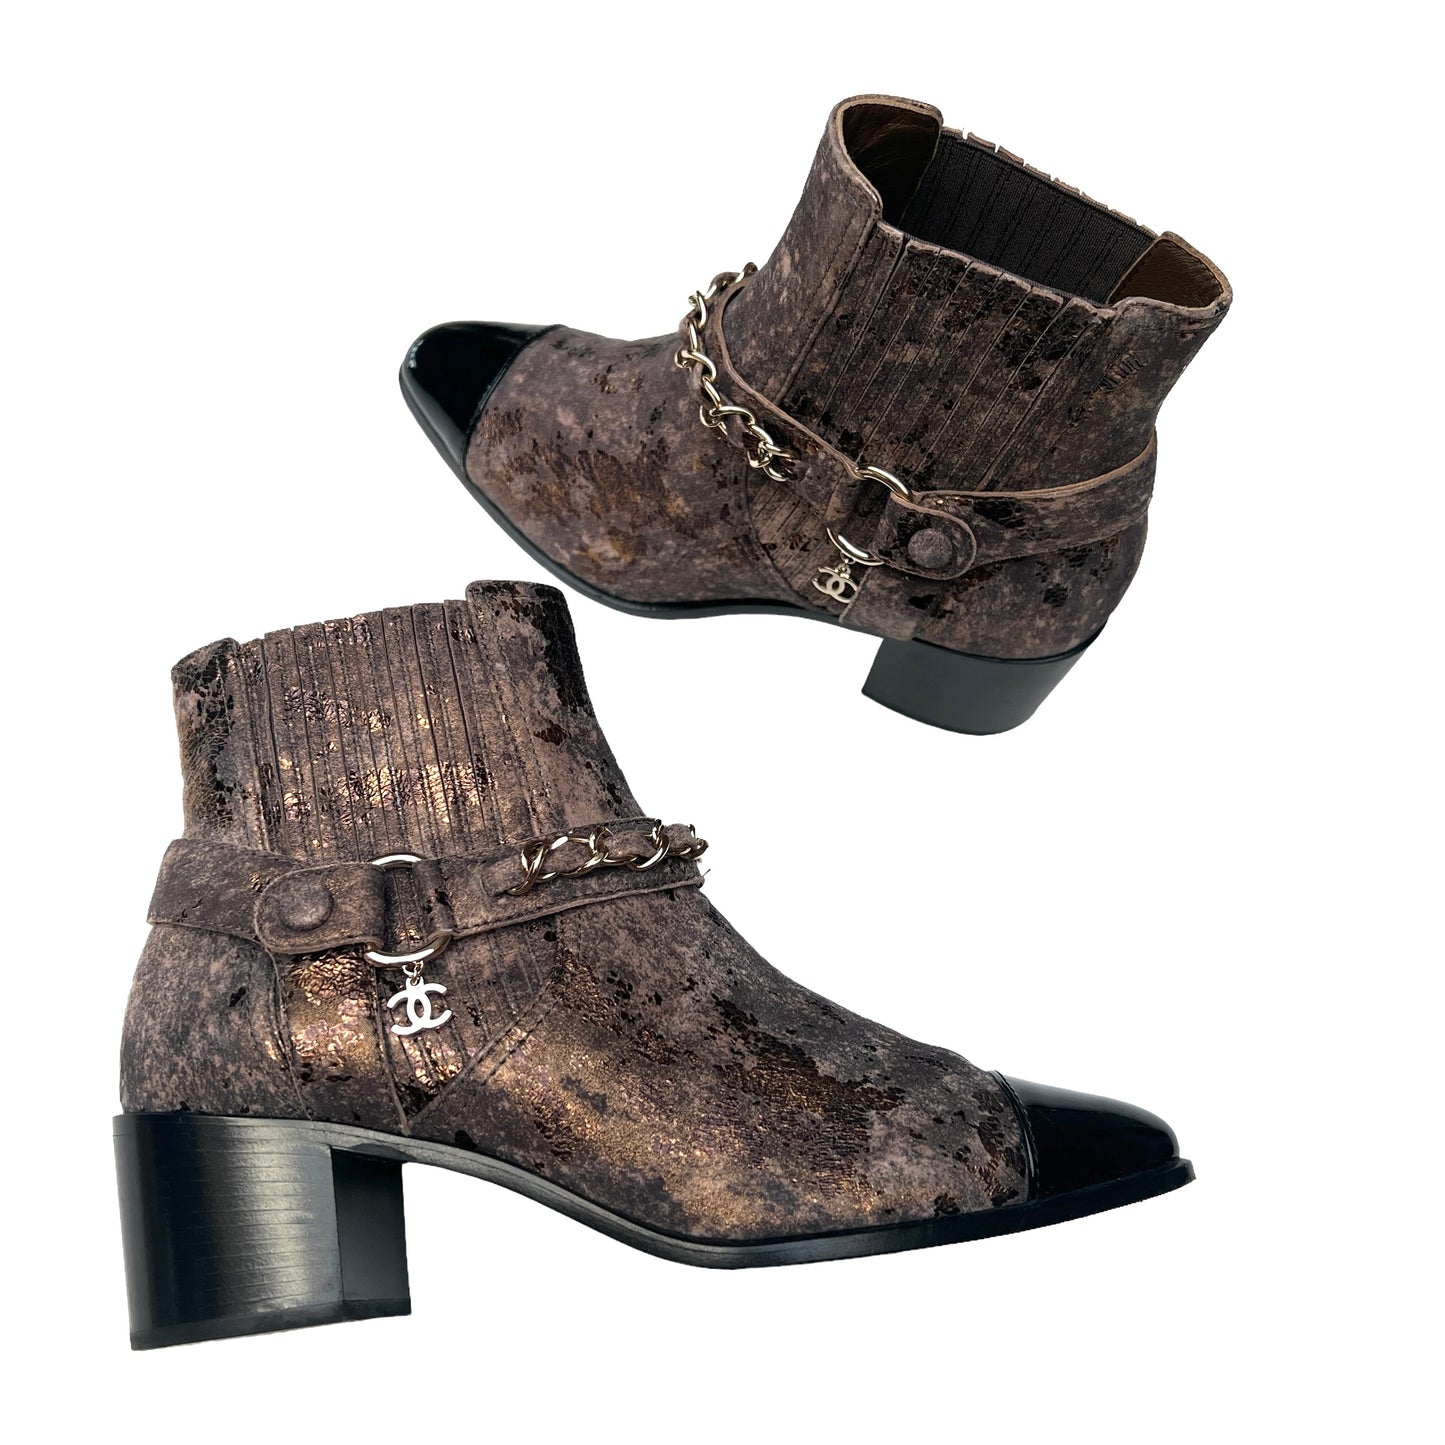 Black & Brown Ankle Boots - 8